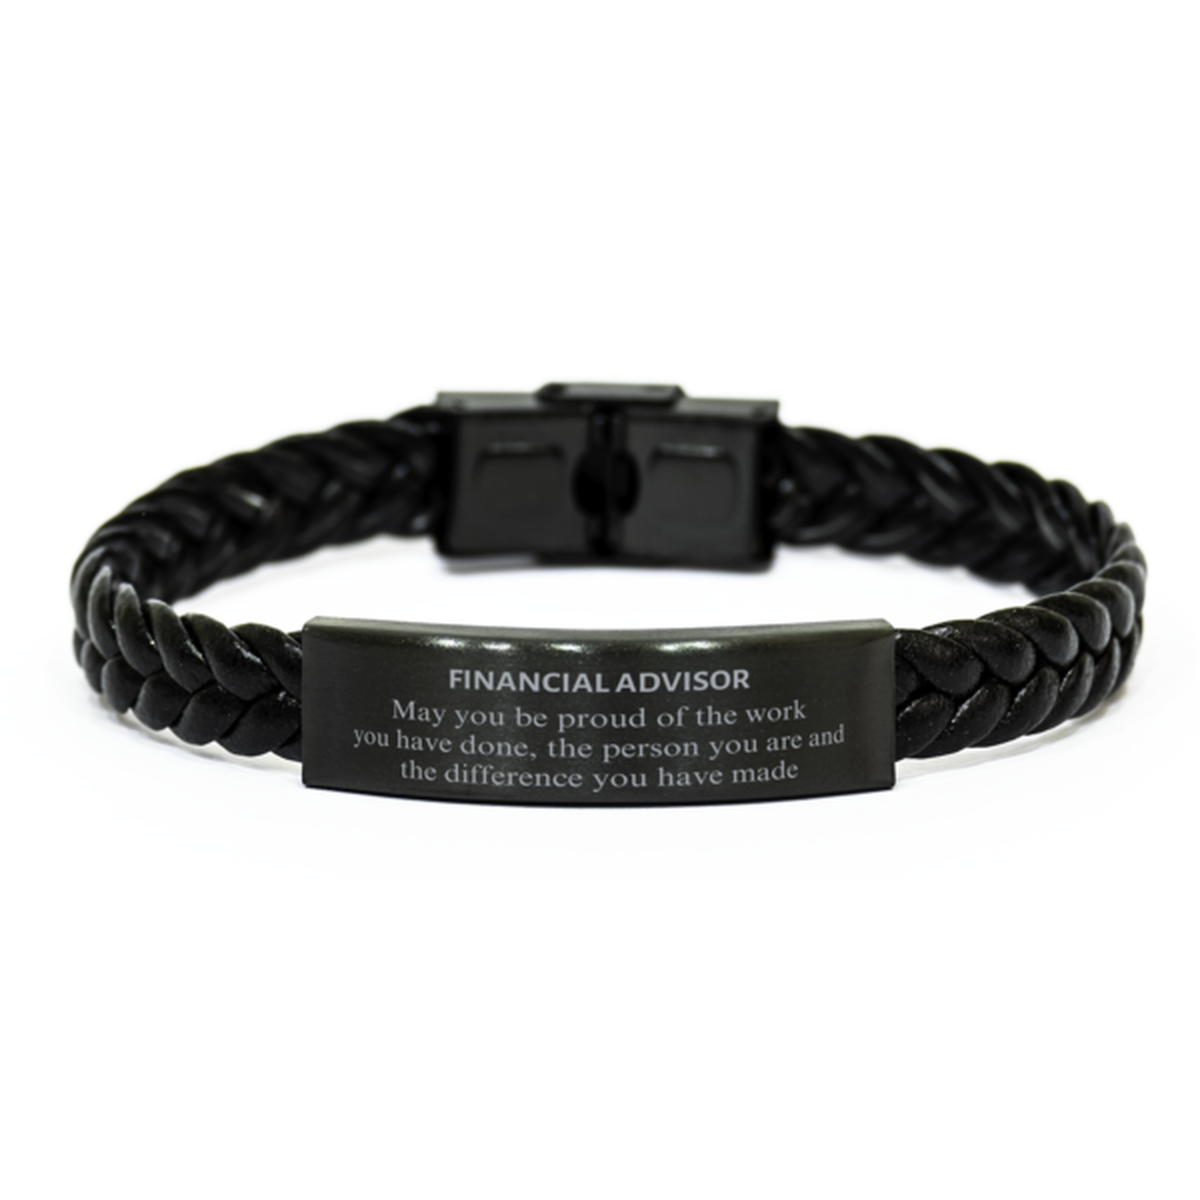 Financial Advisor May you be proud of the work you have done, Retirement Financial Advisor Braided Leather Bracelet for Colleague Appreciation Gifts Amazing for Financial Advisor